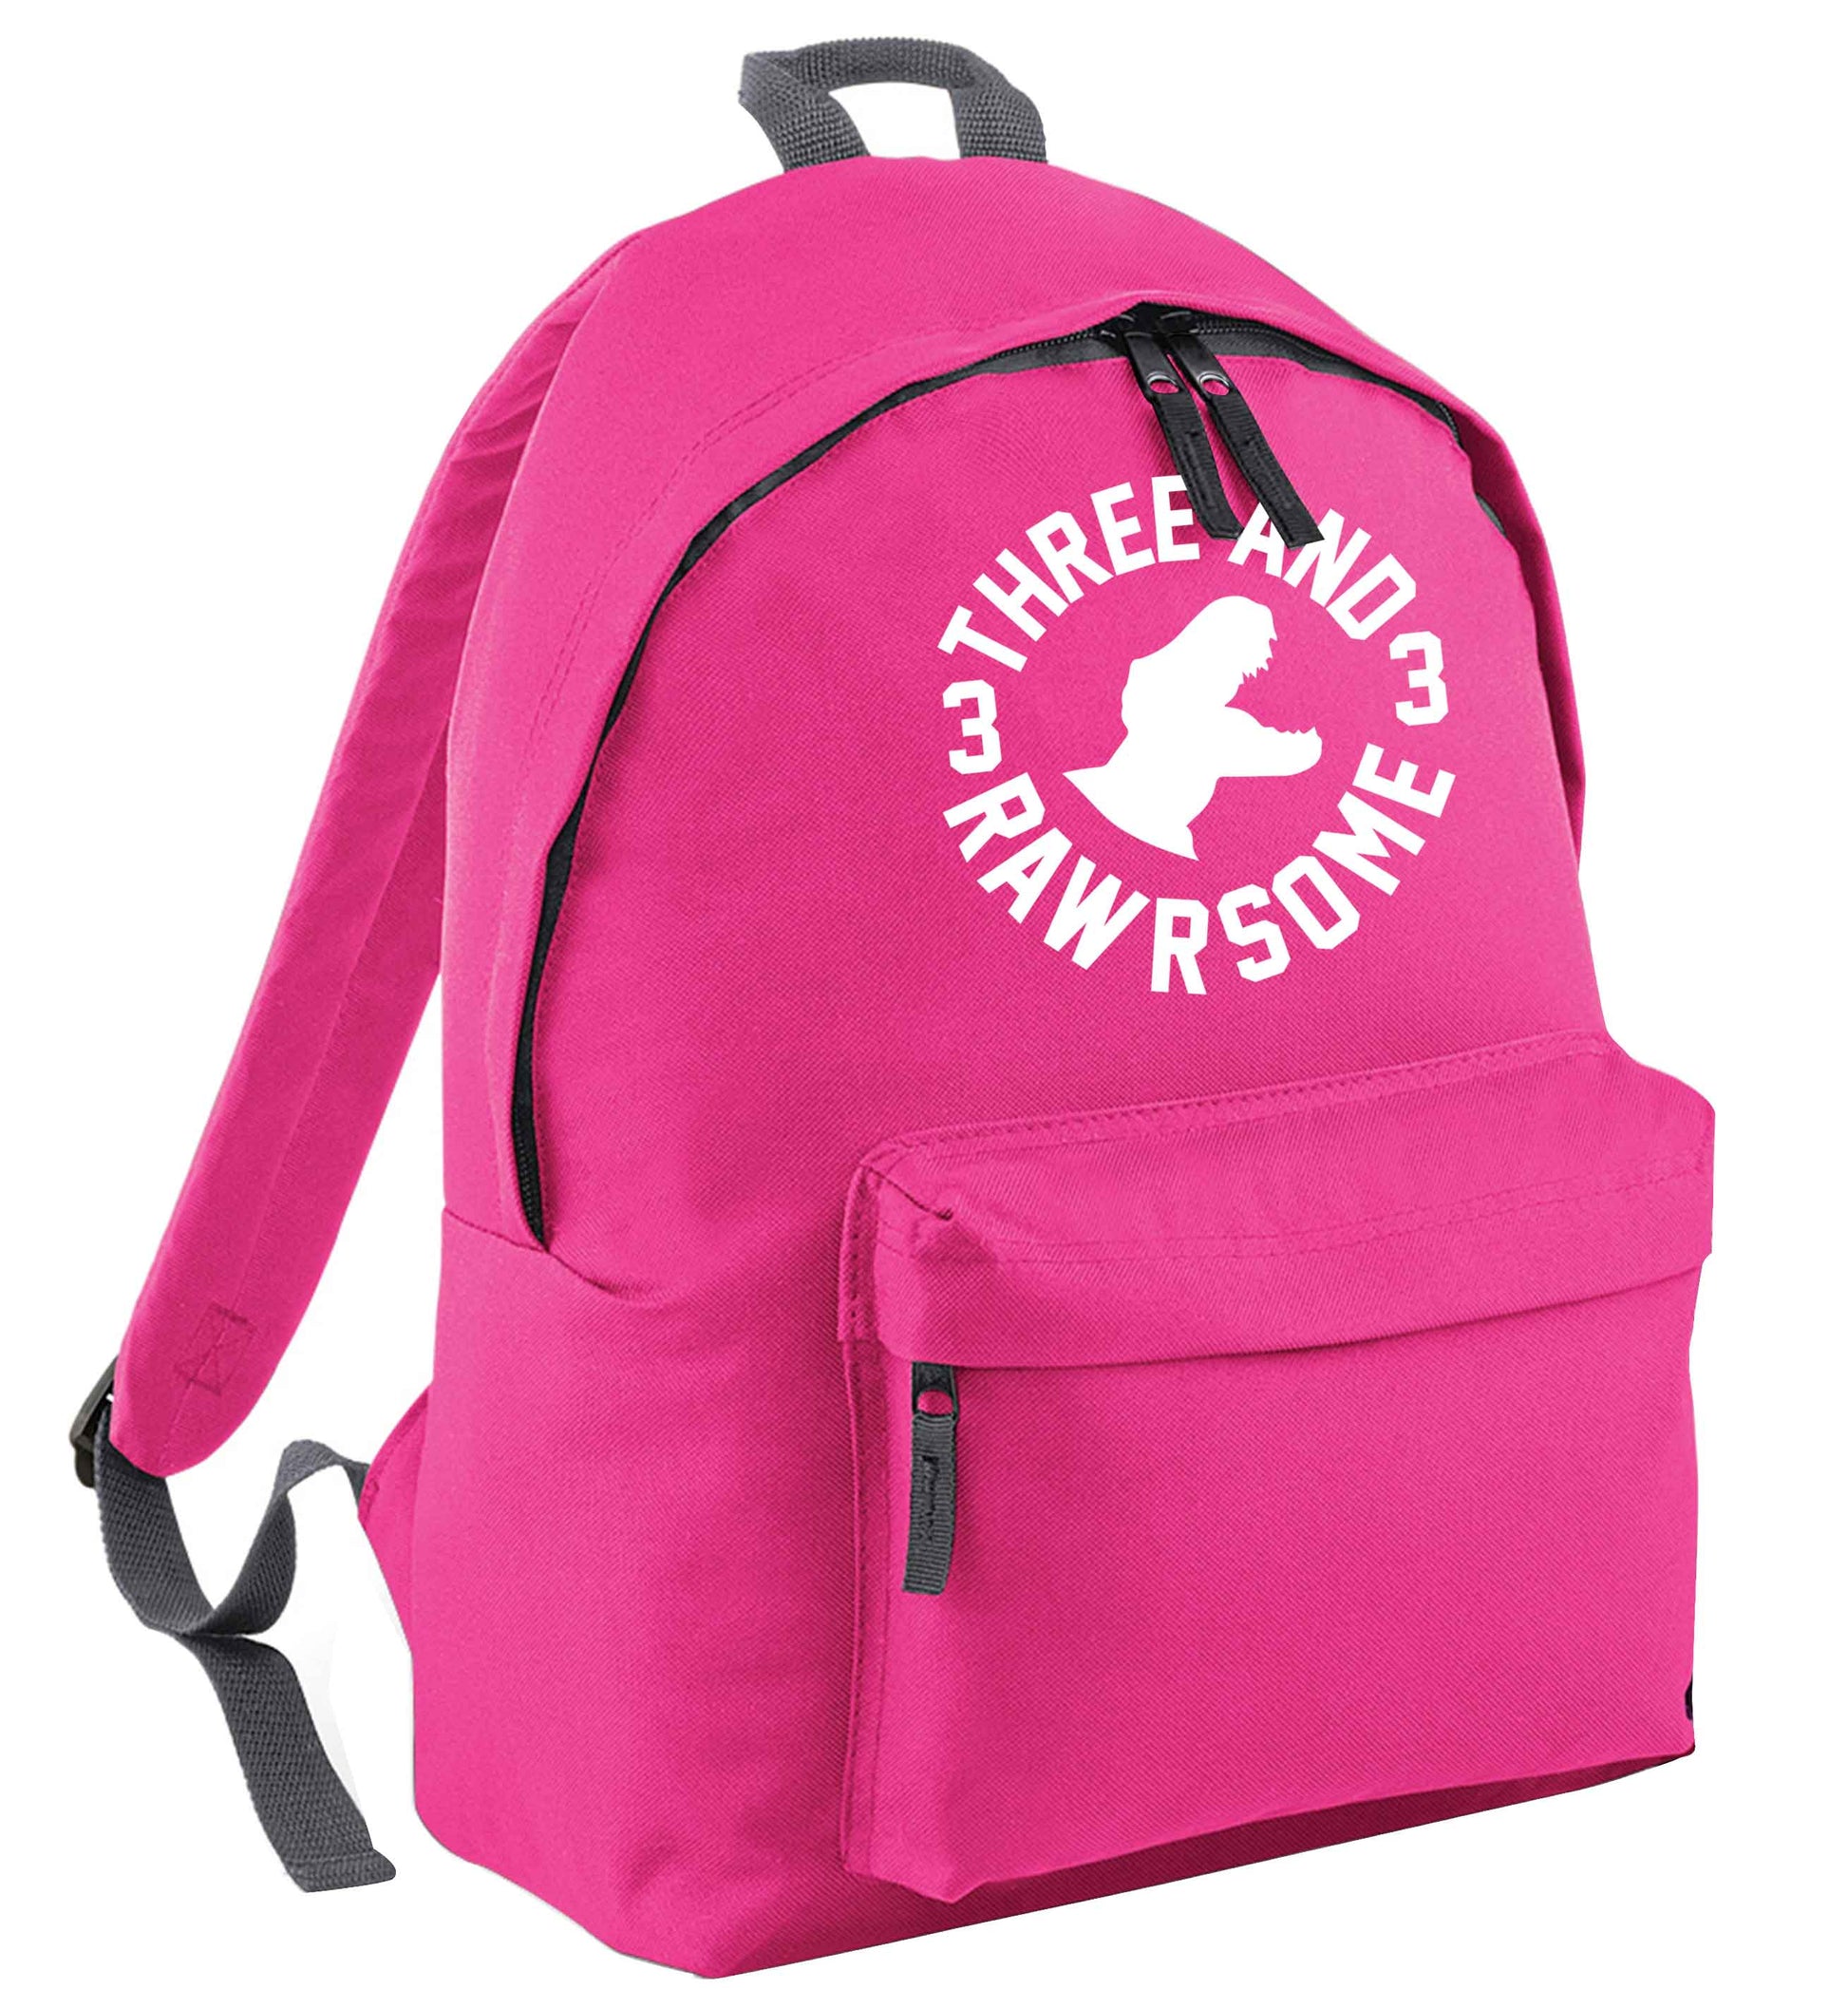 Three and rawrsome pink adults backpack